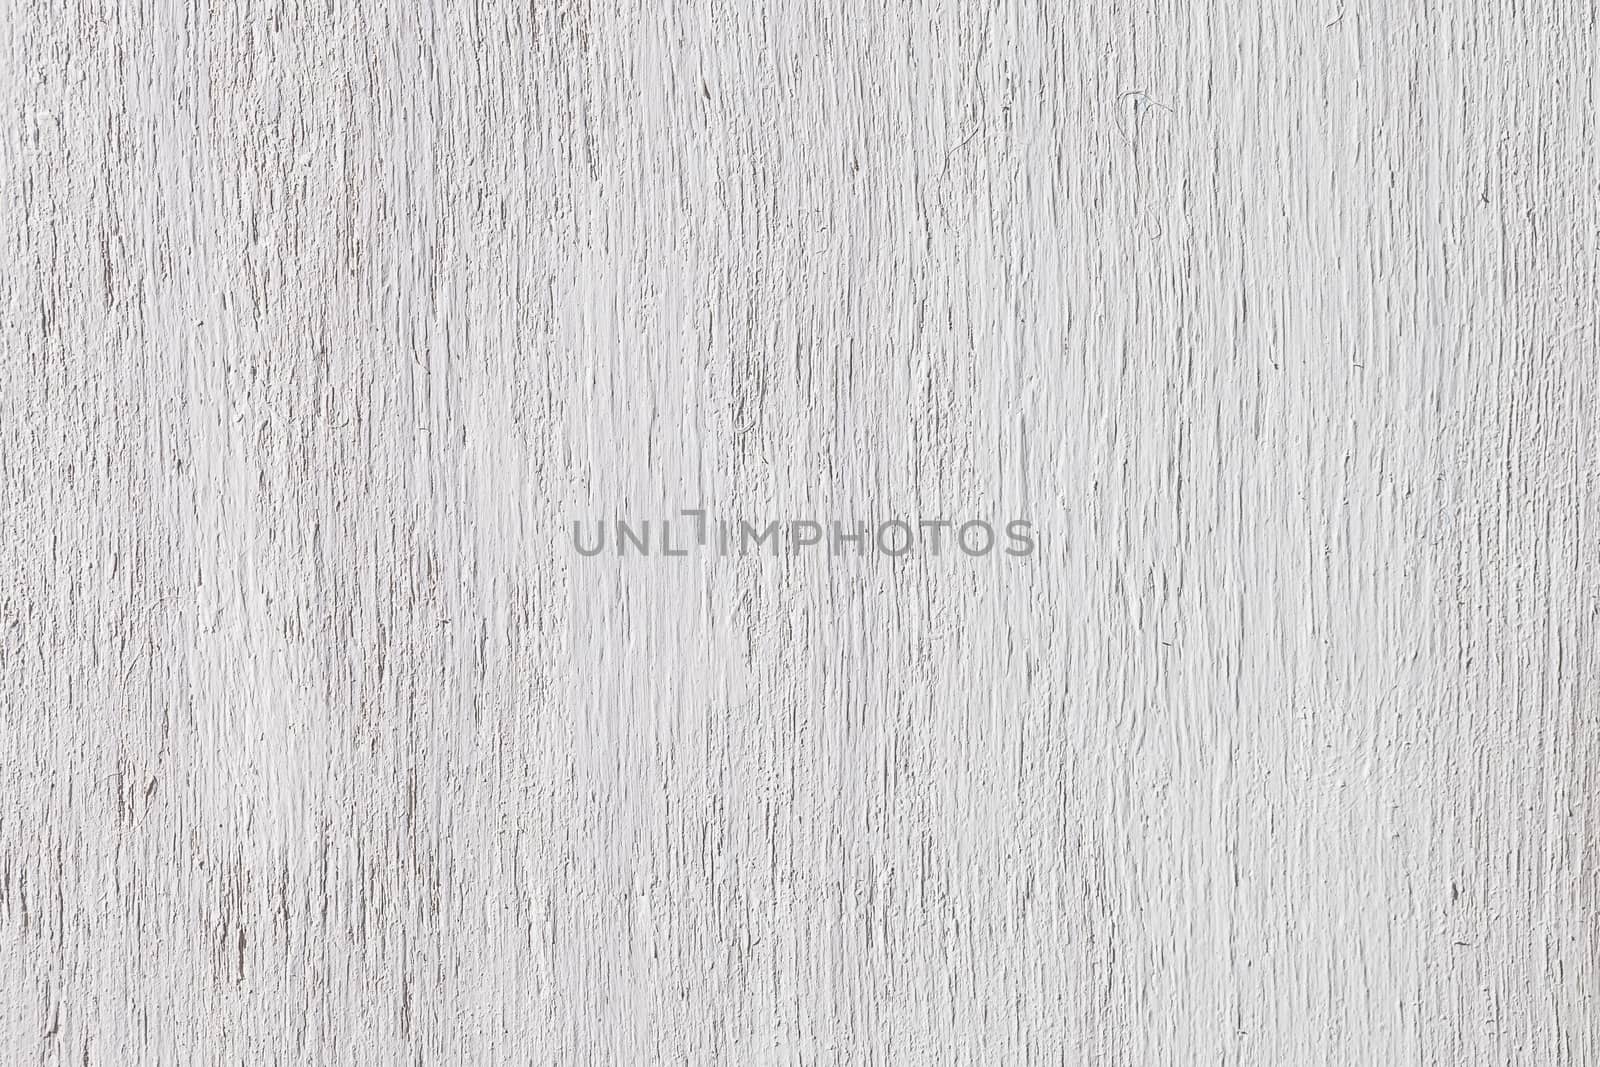 Vintage  White  Wood Wall by H2Oshka